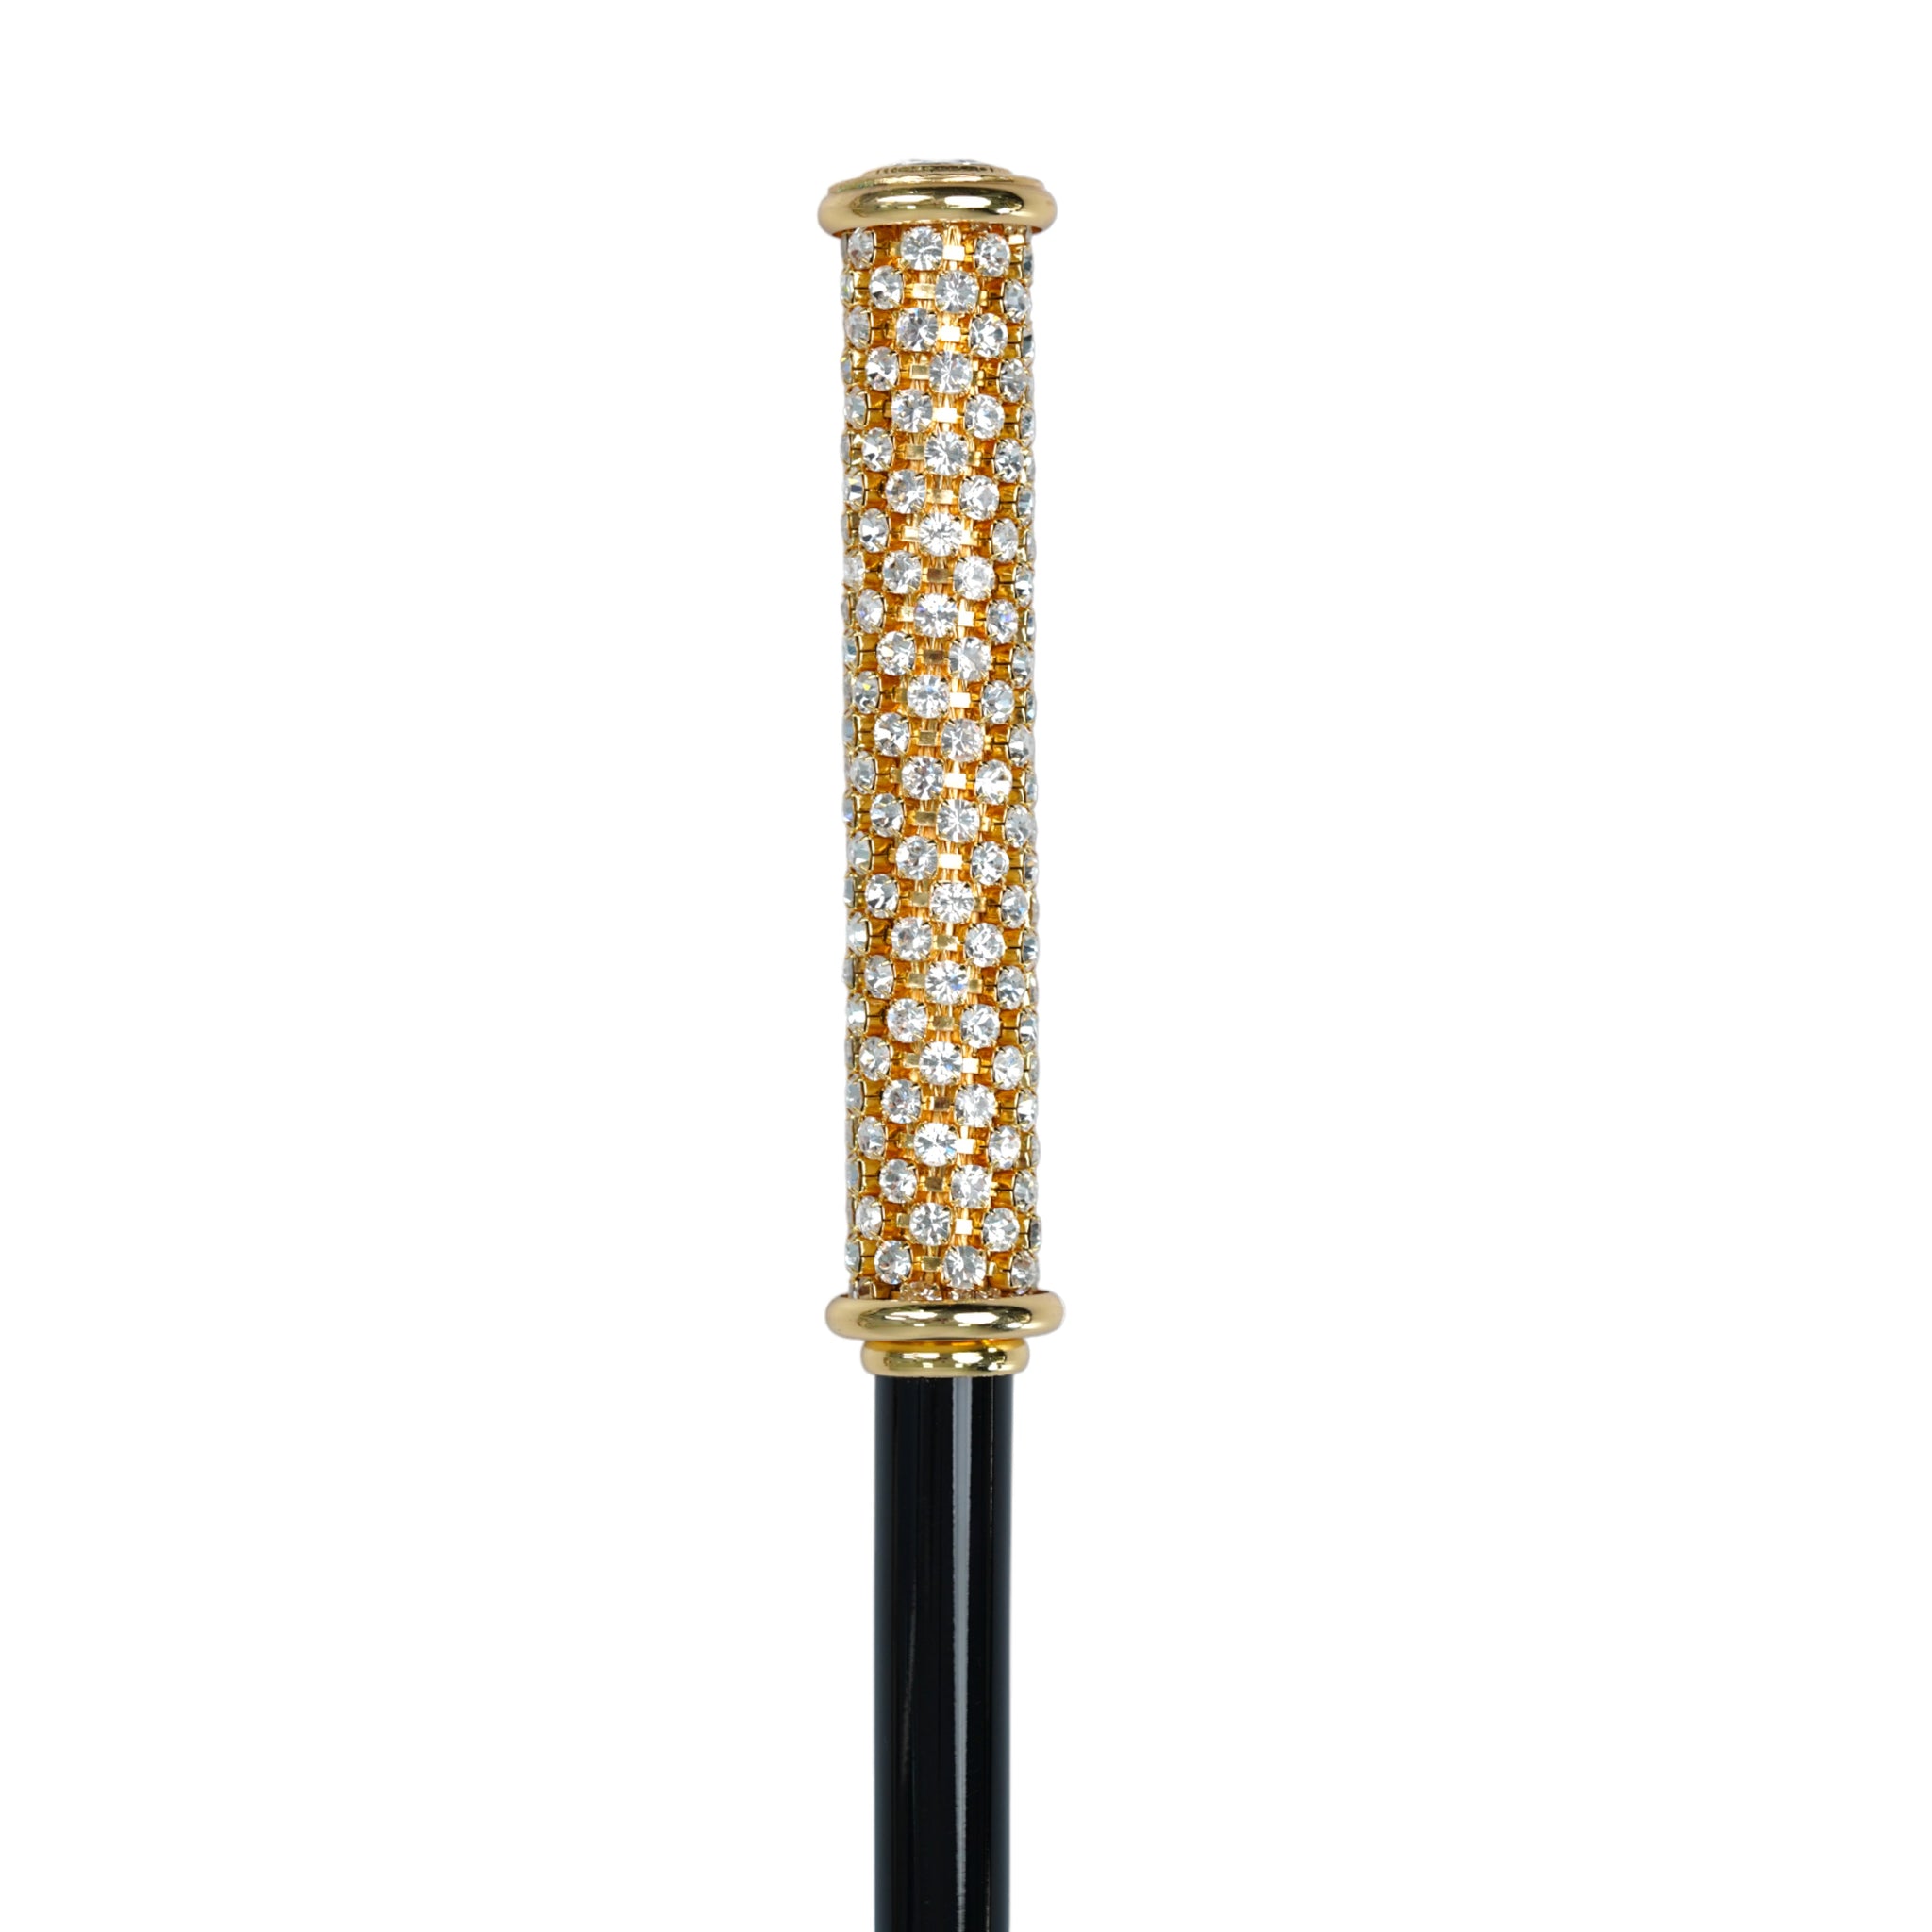 Regal Crystal Touch: 24K Gold-Plated Walking Sticks with Crystals